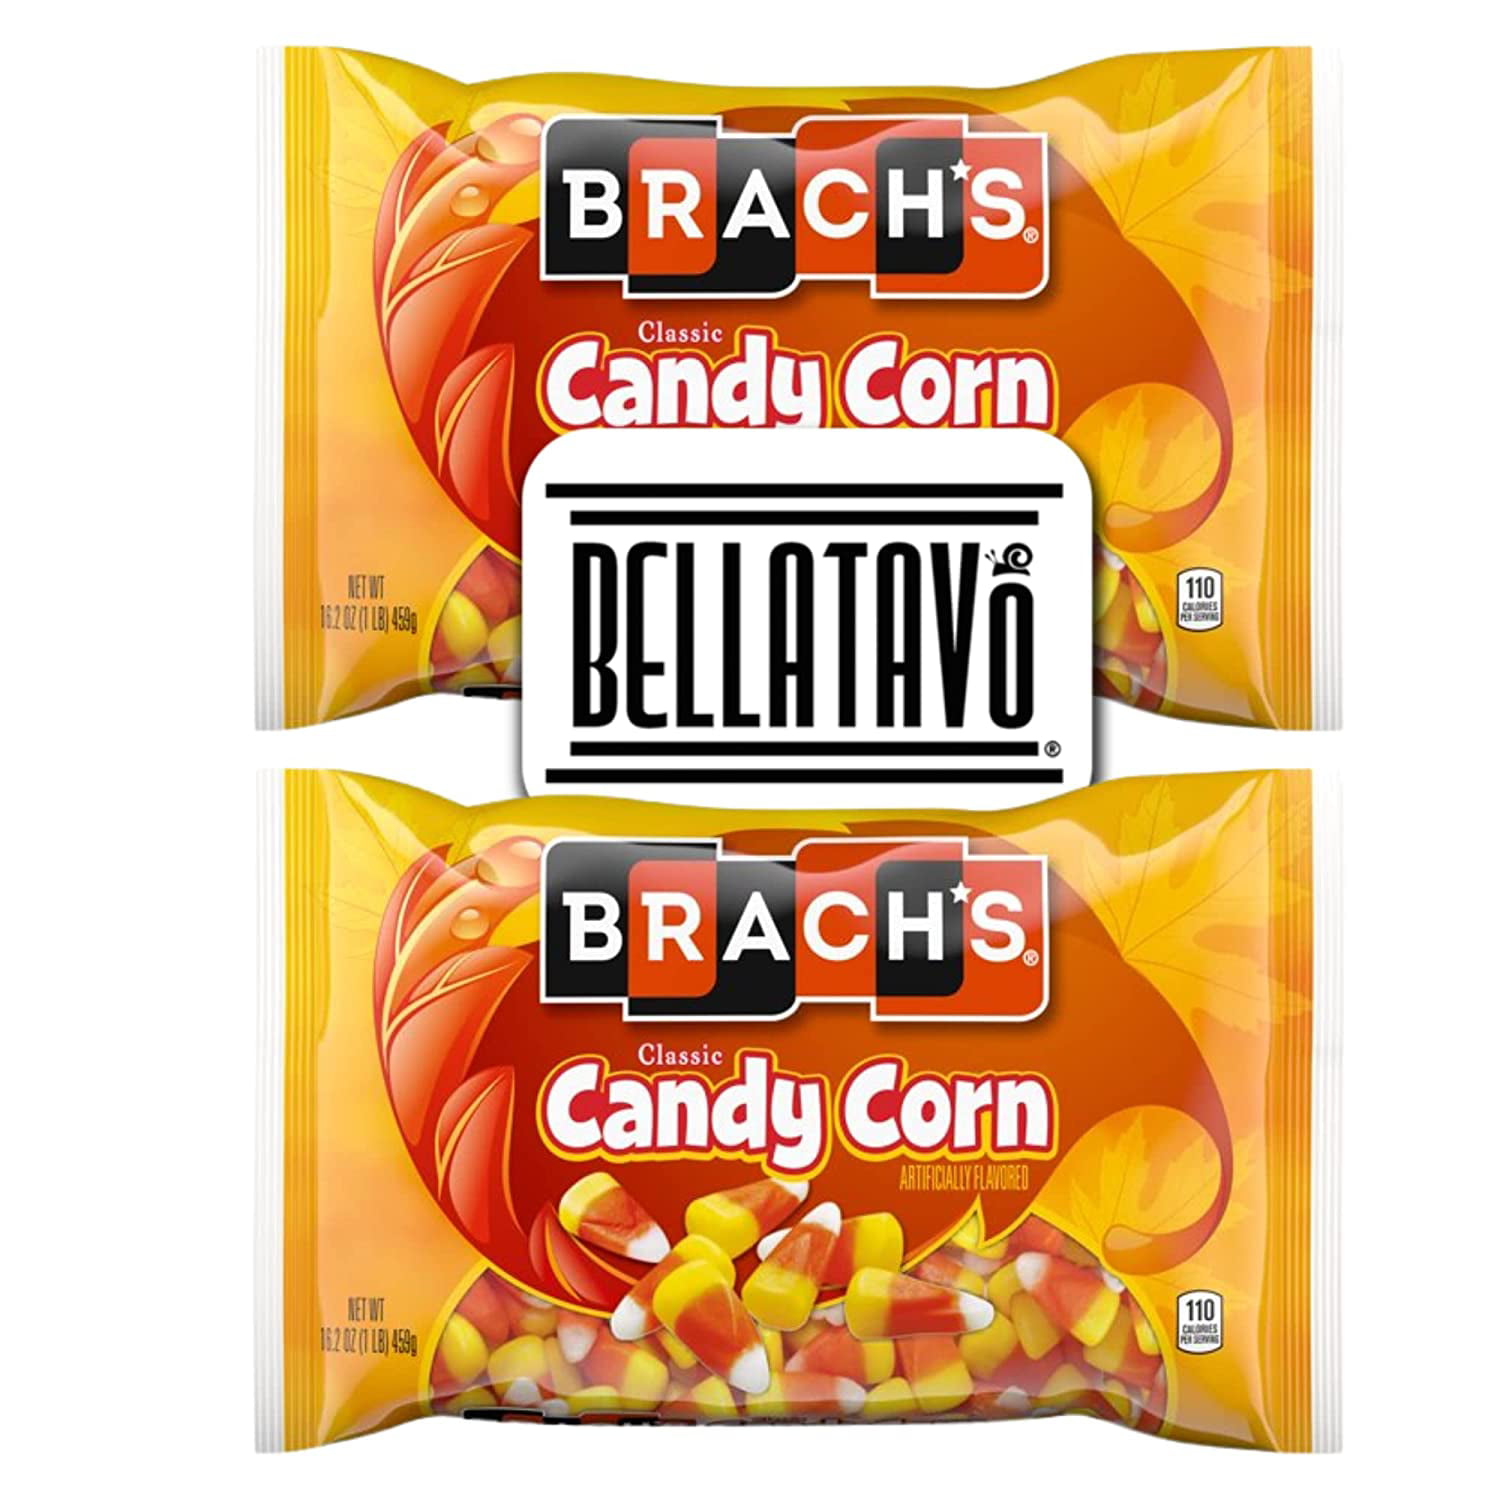 Halloween Candy Variety Pack Bundle. Includes Two-16.2 Oz Bags of Brachs  Candy Plus a BELLATAVO Fridge Magnet! One Each: Brachs Candy Corn and Brachs  Pumpkin Candy. Get Two Pounds of Halloween Candy! 